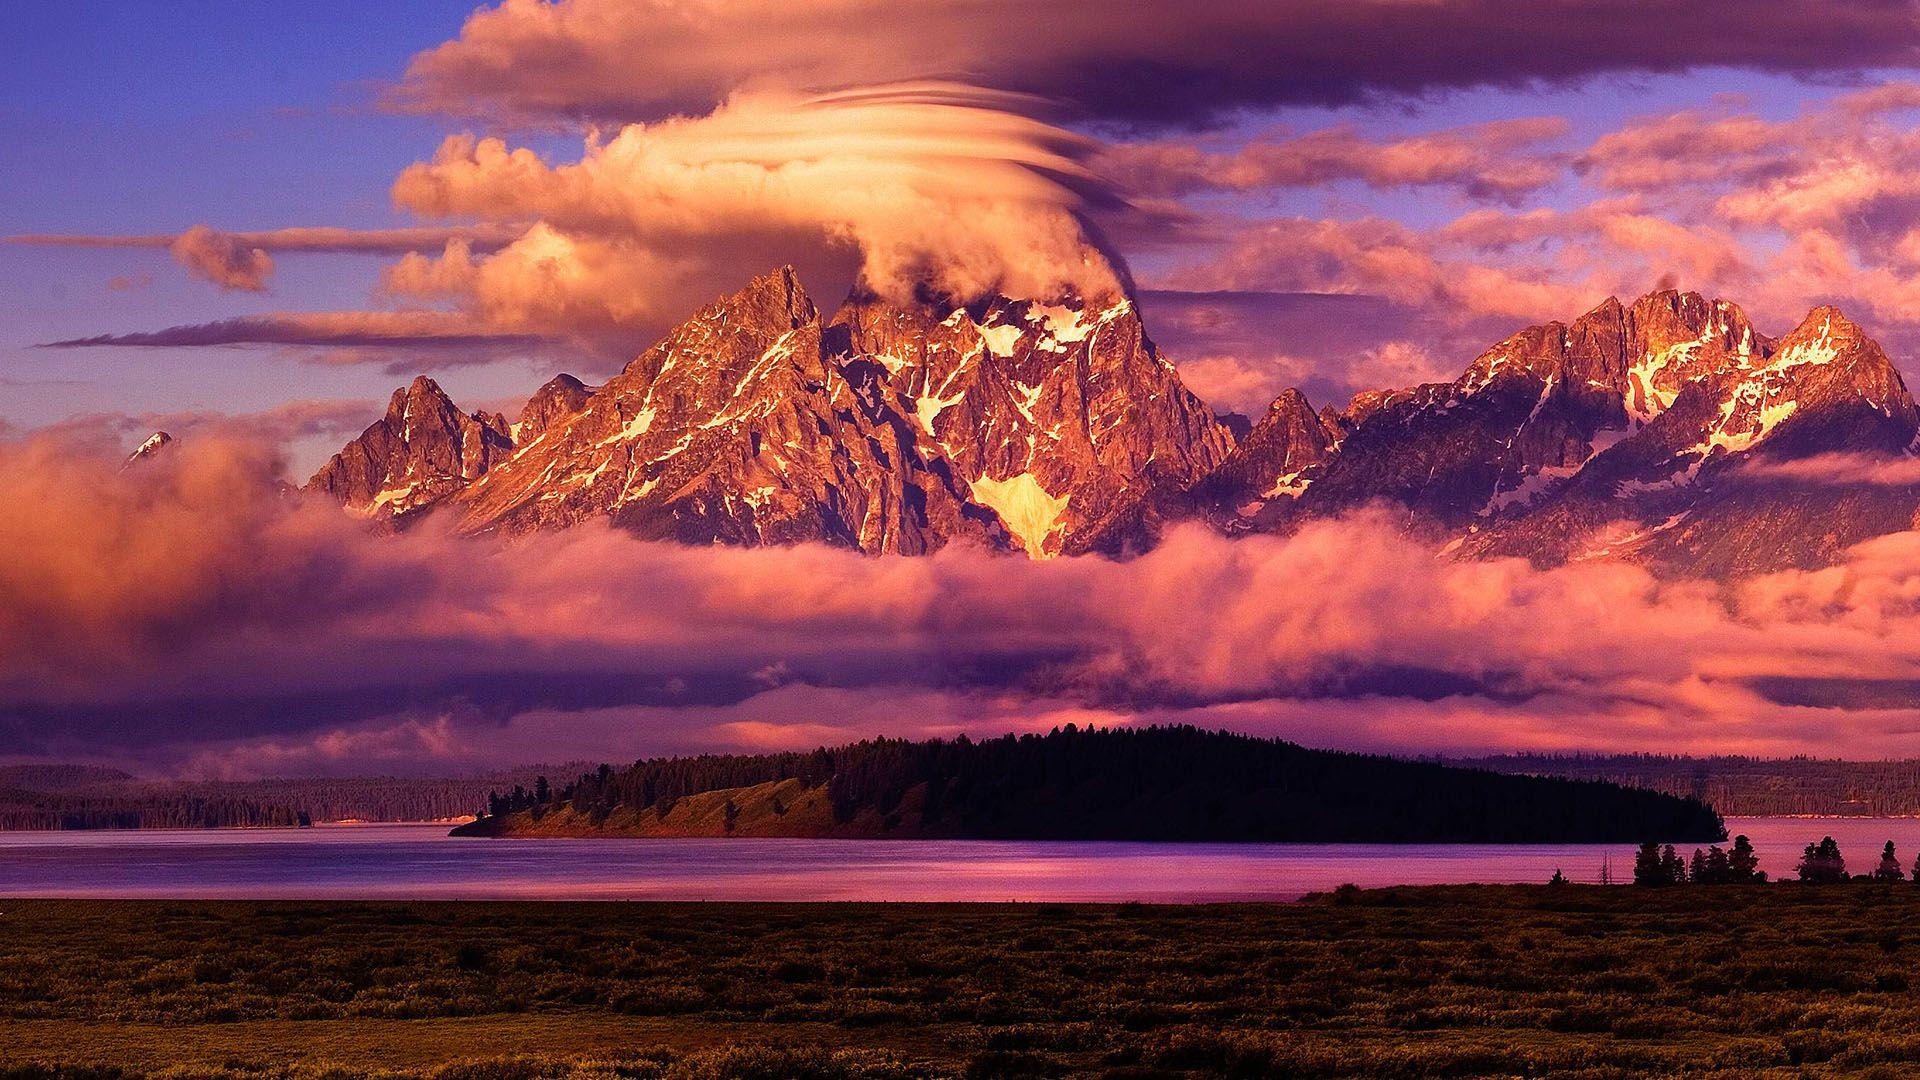 Grand Teton National Park Wallpaper. The Monk's Picture